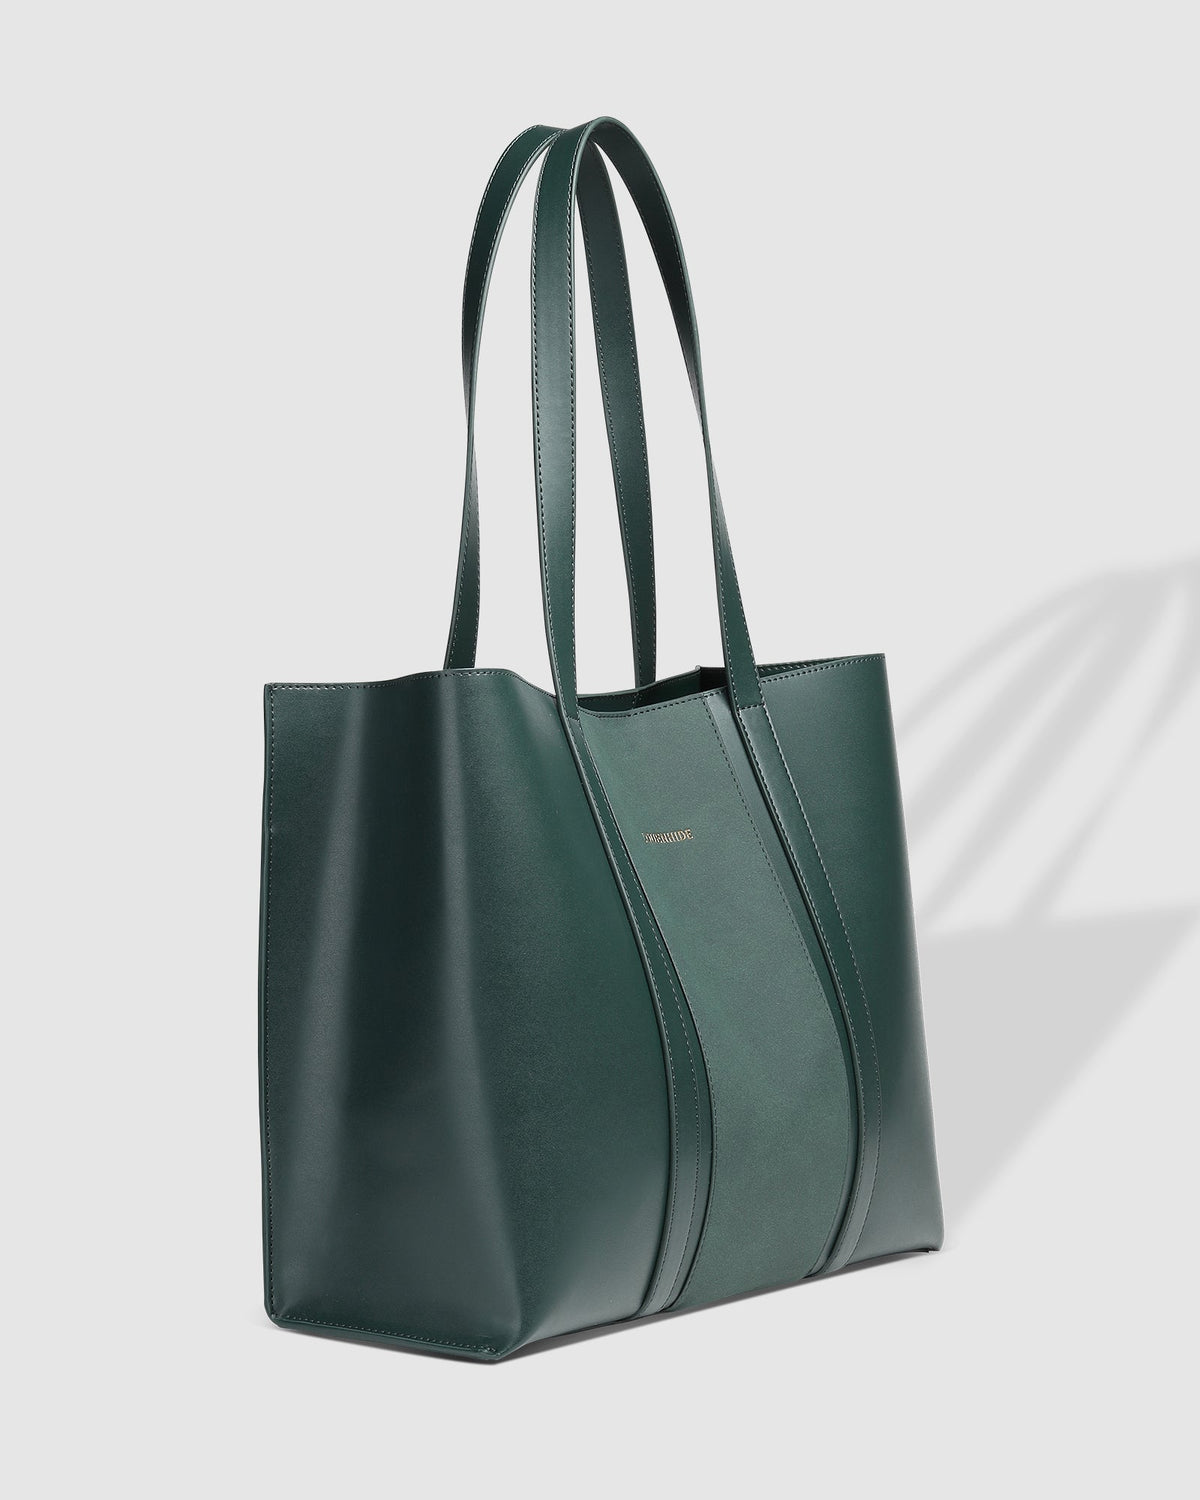 LOUENHIDE_MAXINE TOTE BAG FOREST GREEN _ MAXINE TOTE BAG FOREST GREEN _ Ebony Boutique NZ